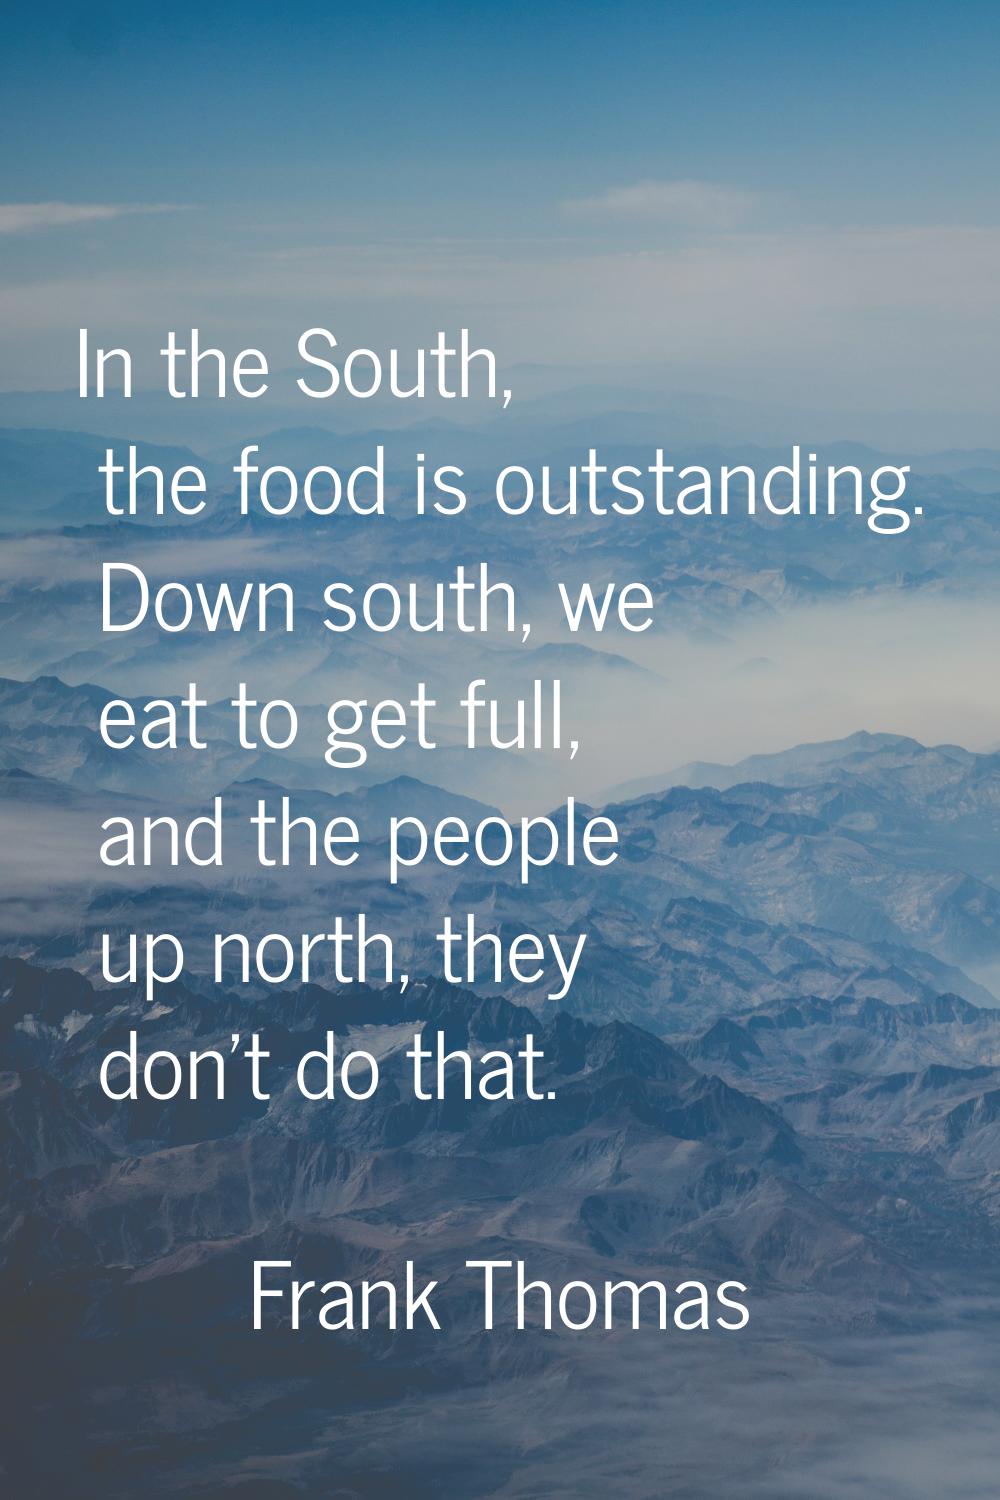 In the South, the food is outstanding. Down south, we eat to get full, and the people up north, the